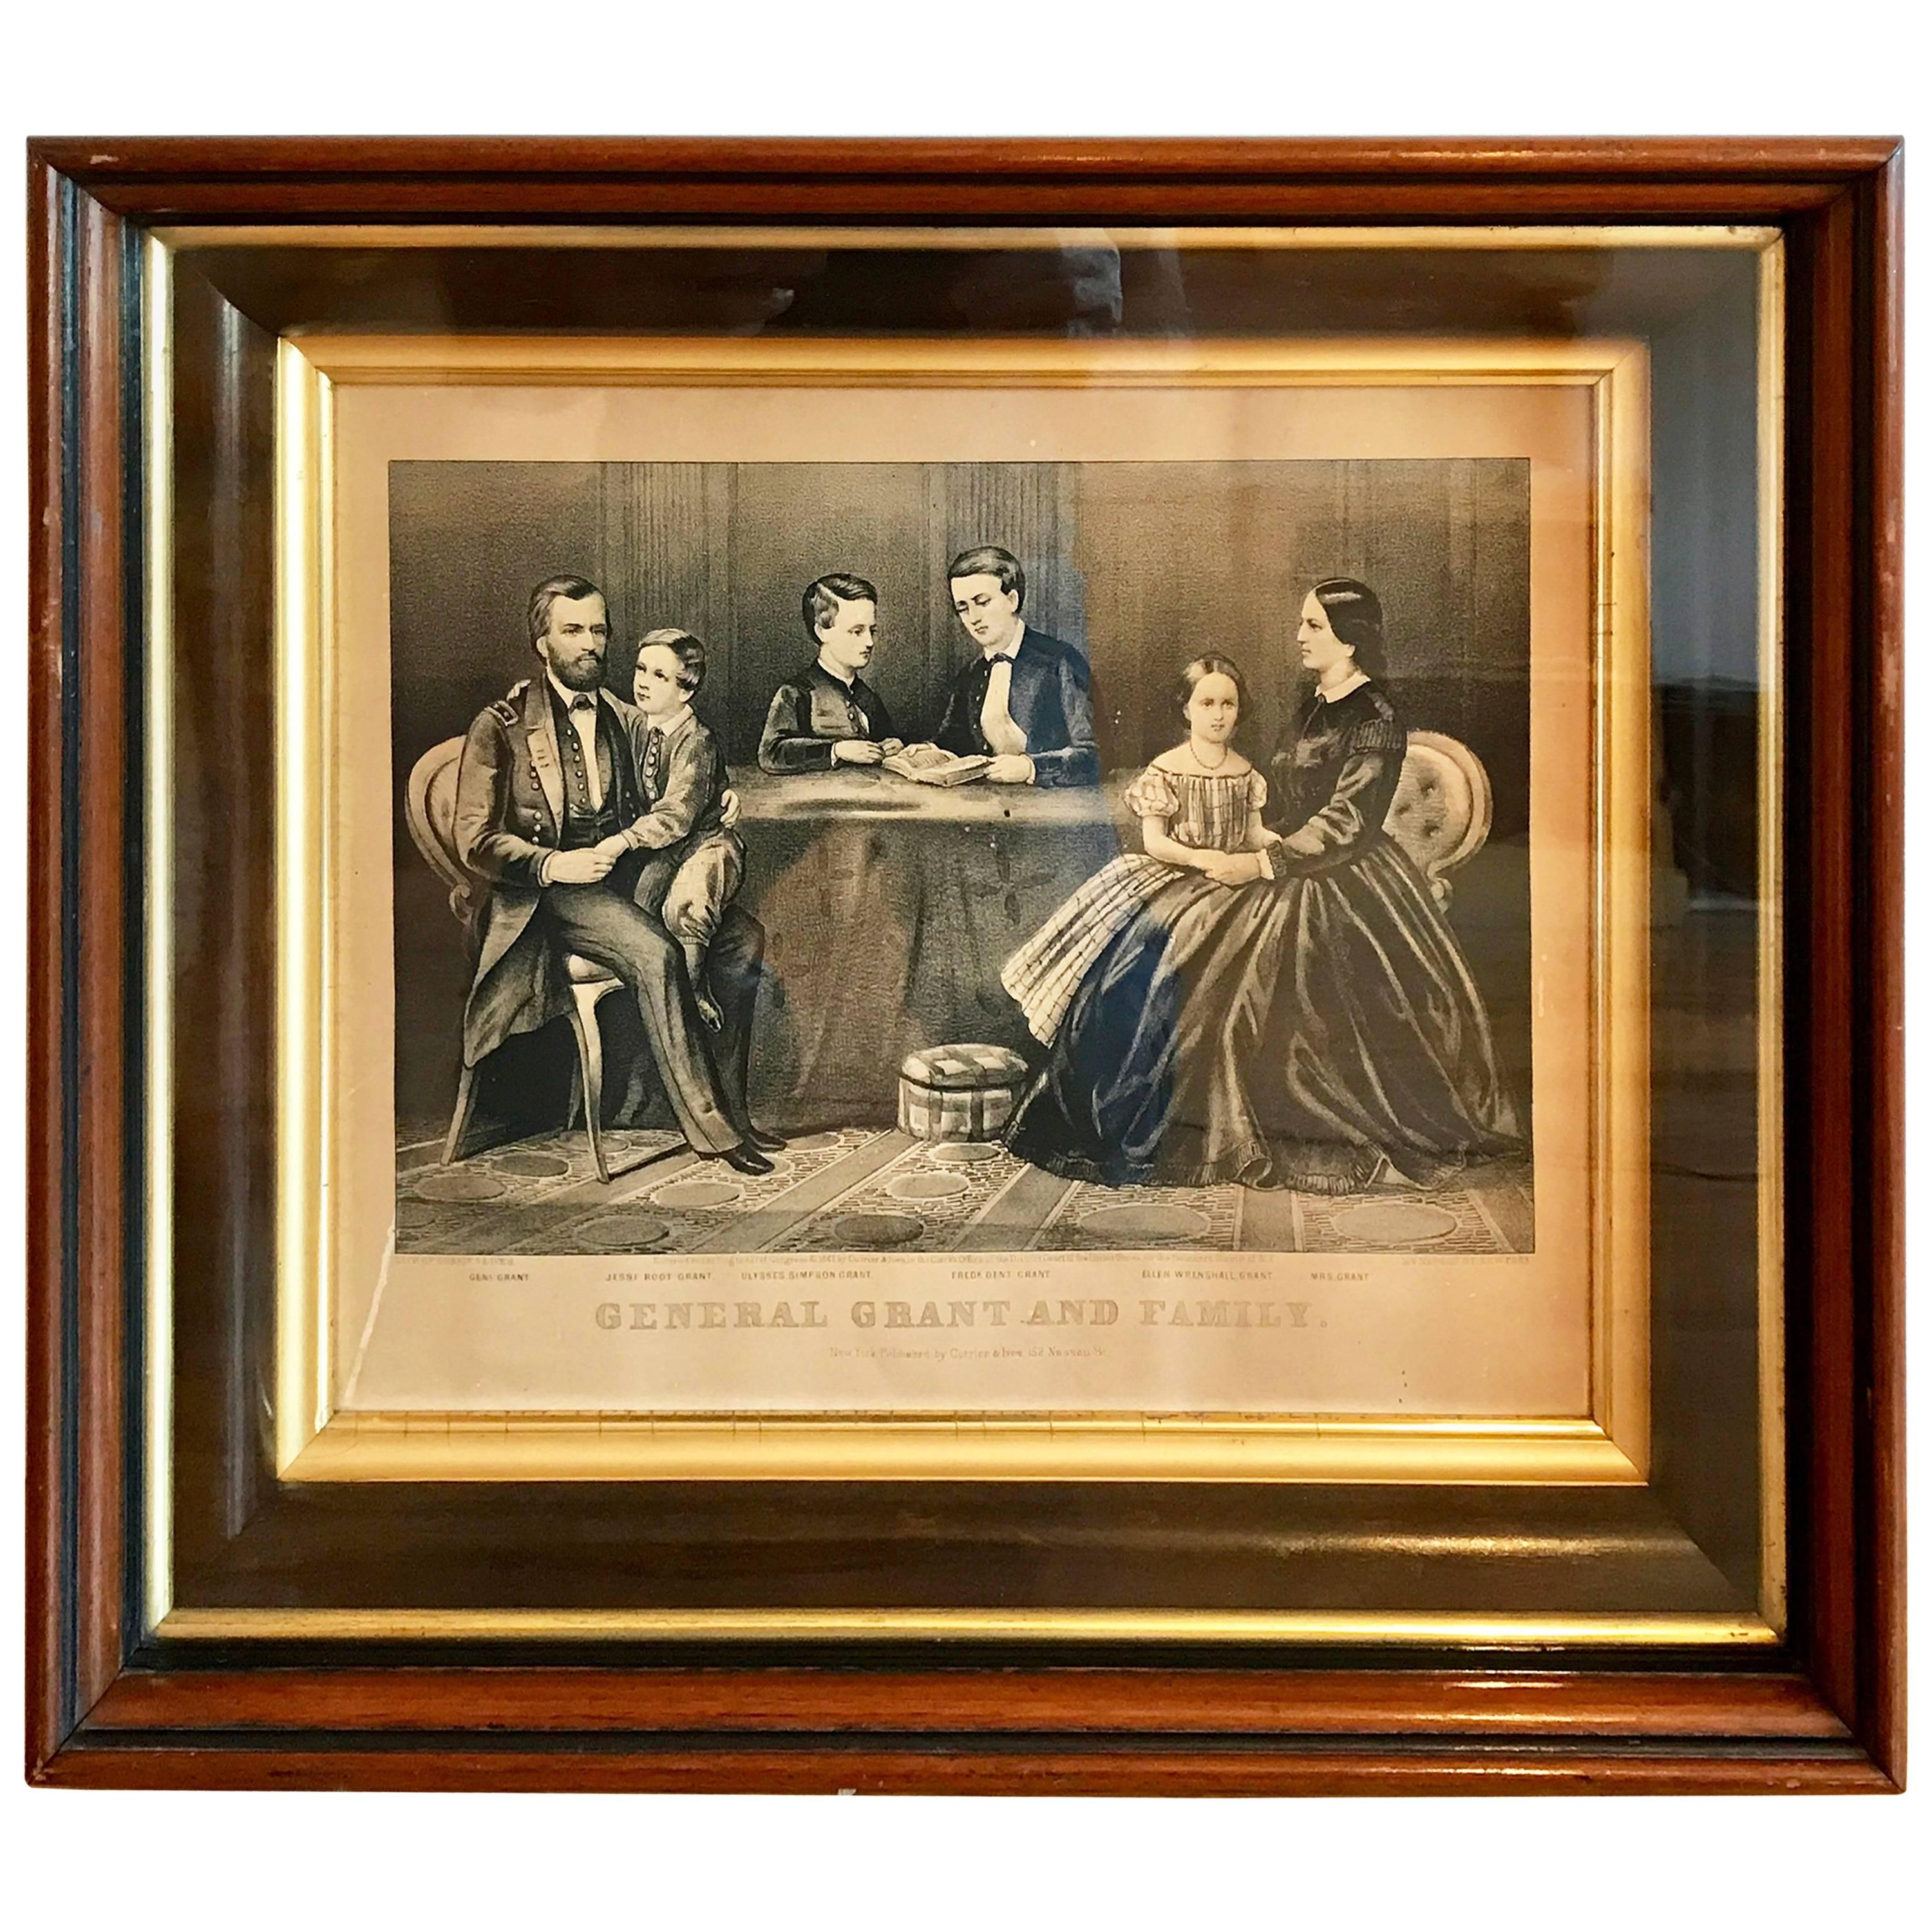 19th Century Currier & Ives Civil War Lithograph, General Grant and Family